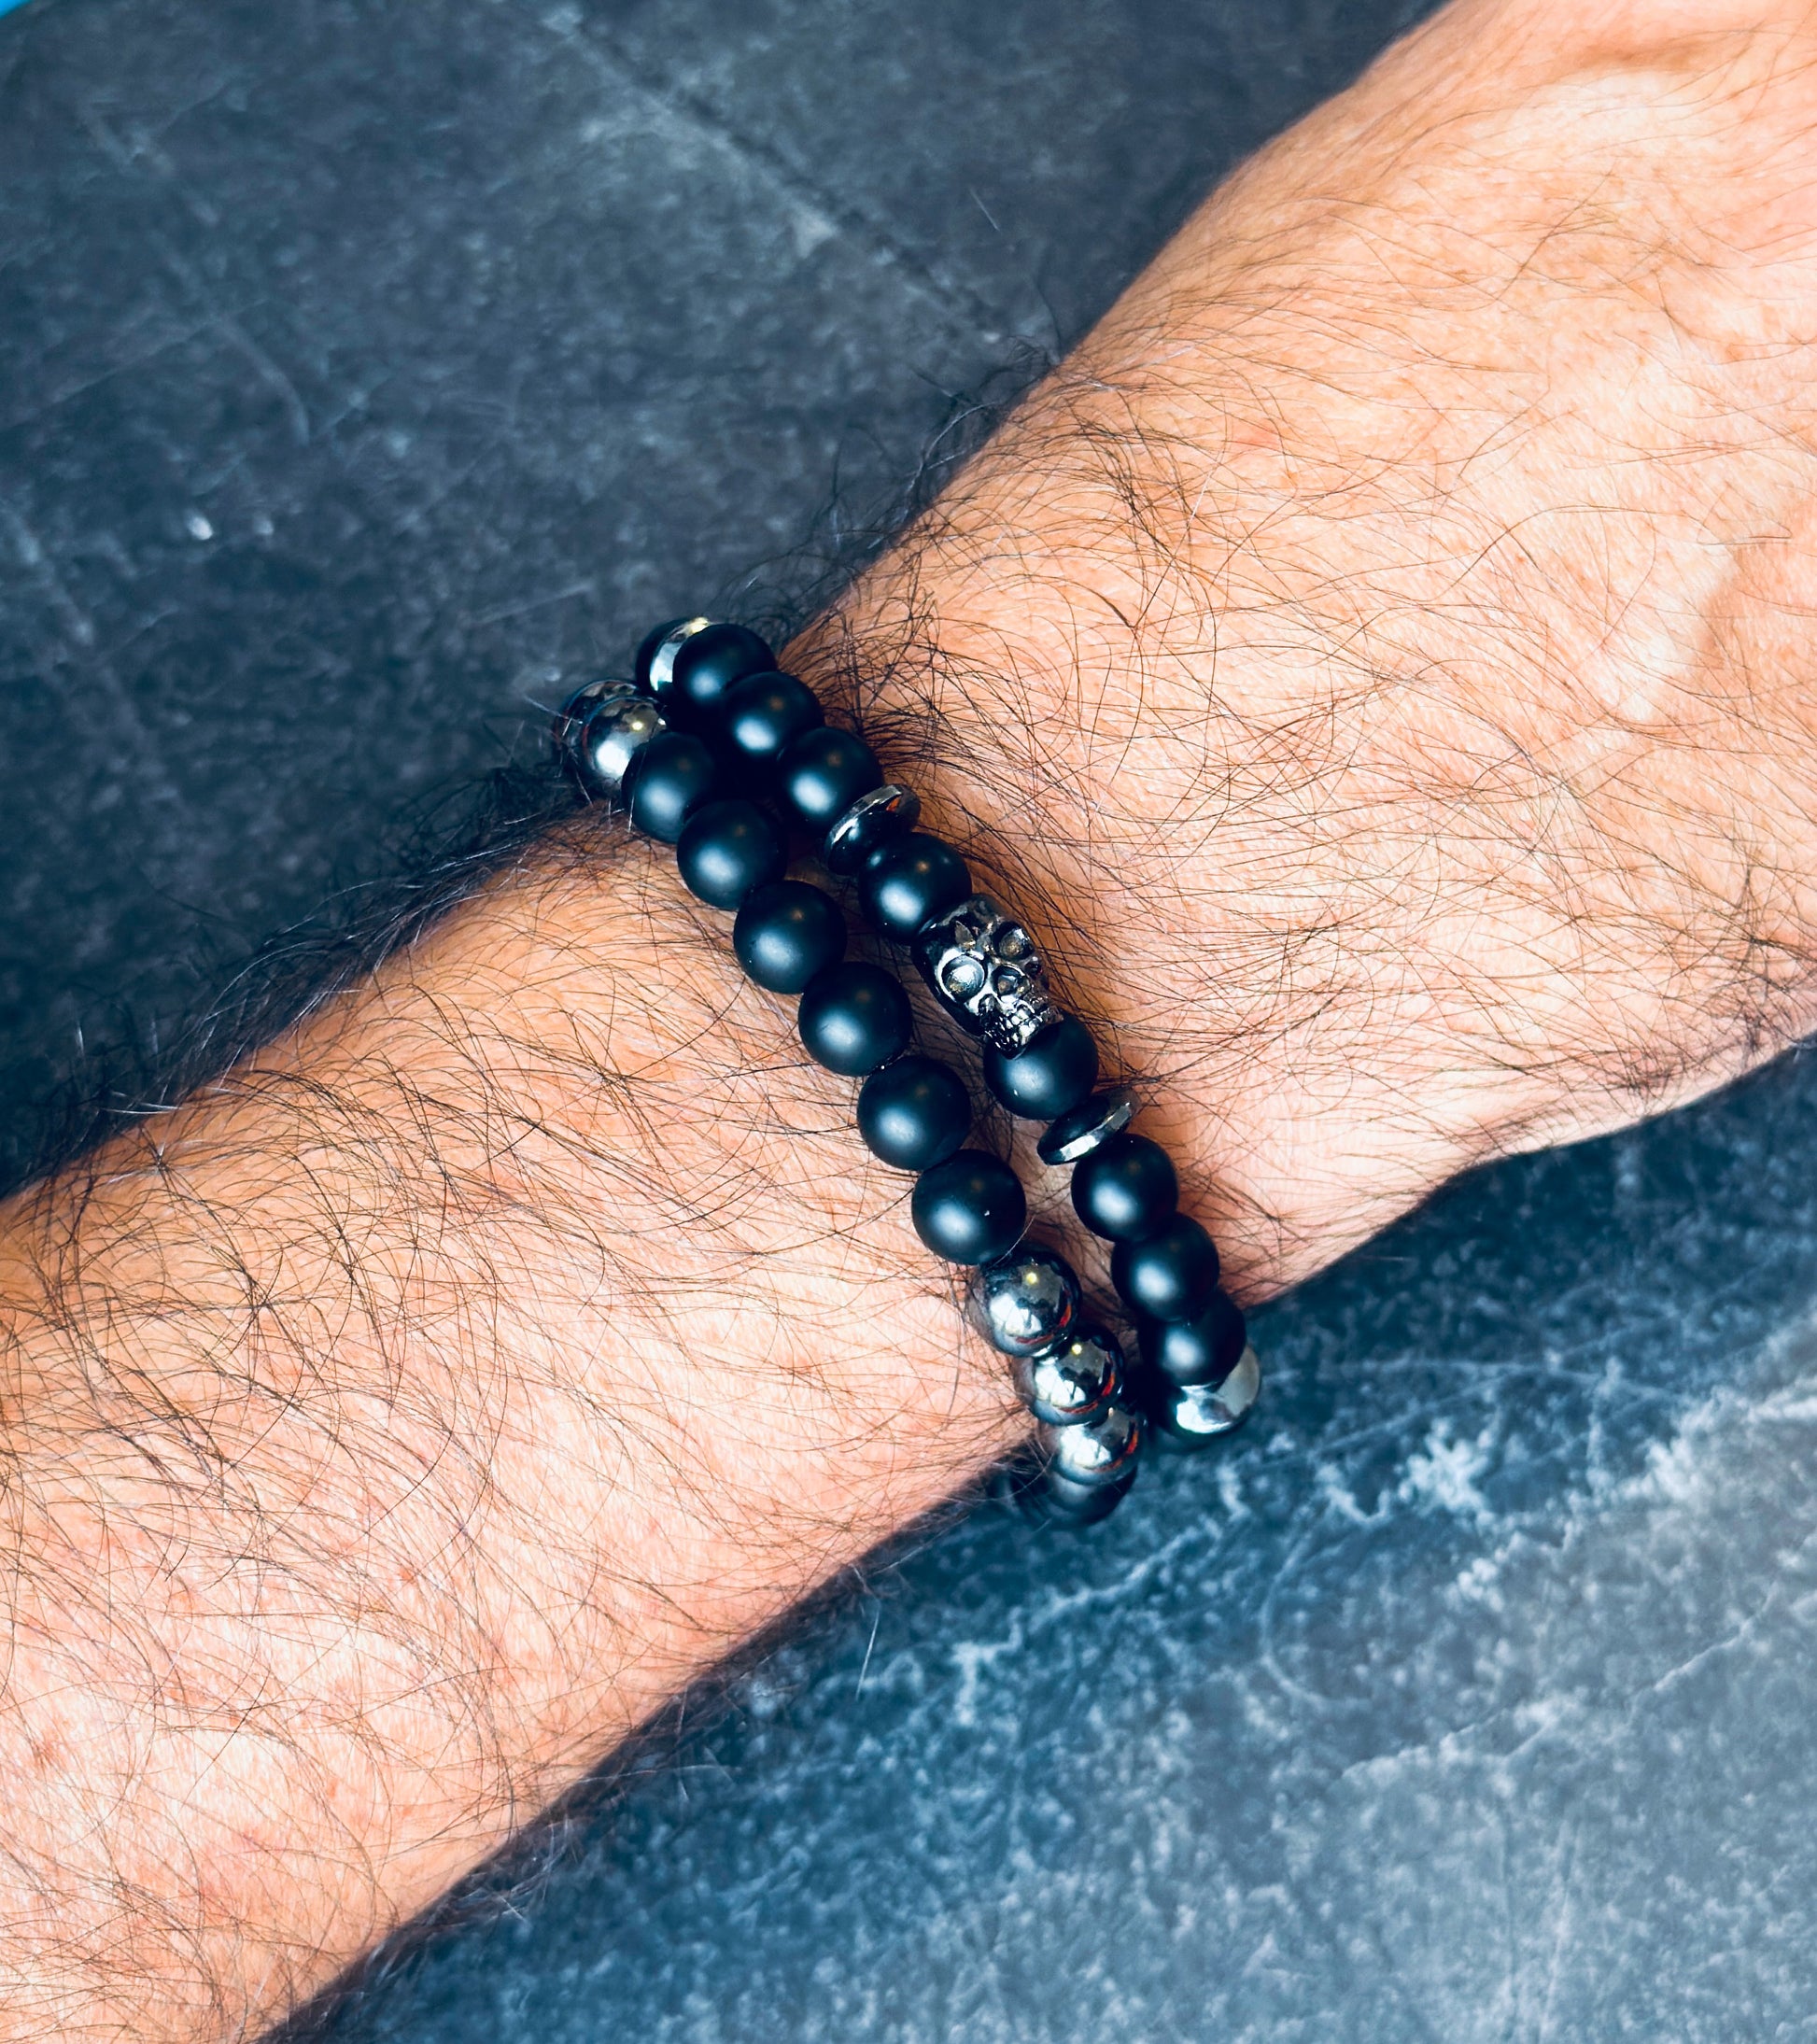 mens gemstone bracelets made with Matte Onyx, Hematite and a skull bead 